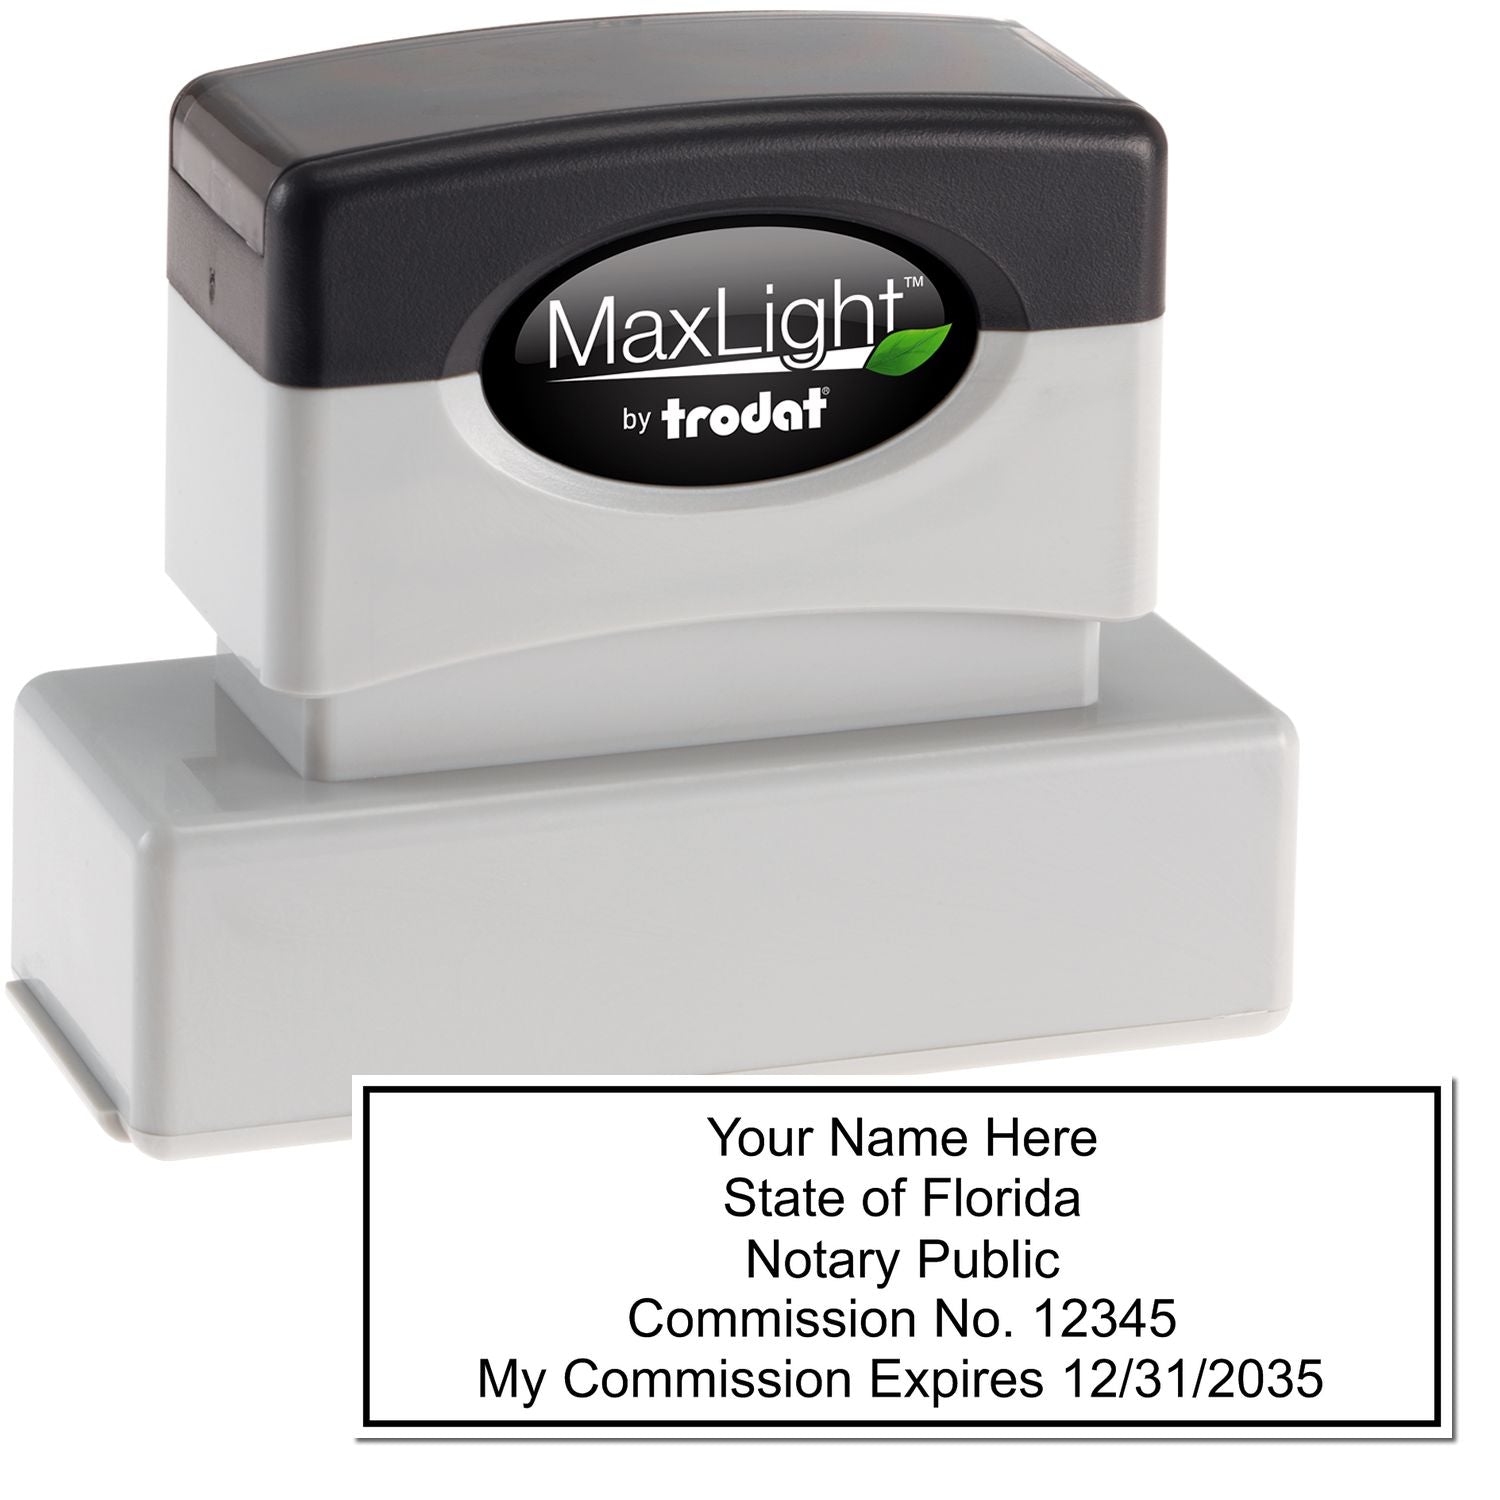 The main image for the MaxLight Premium Pre-Inked Florida Rectangular Notarial Stamp depicting a sample of the imprint and electronic files